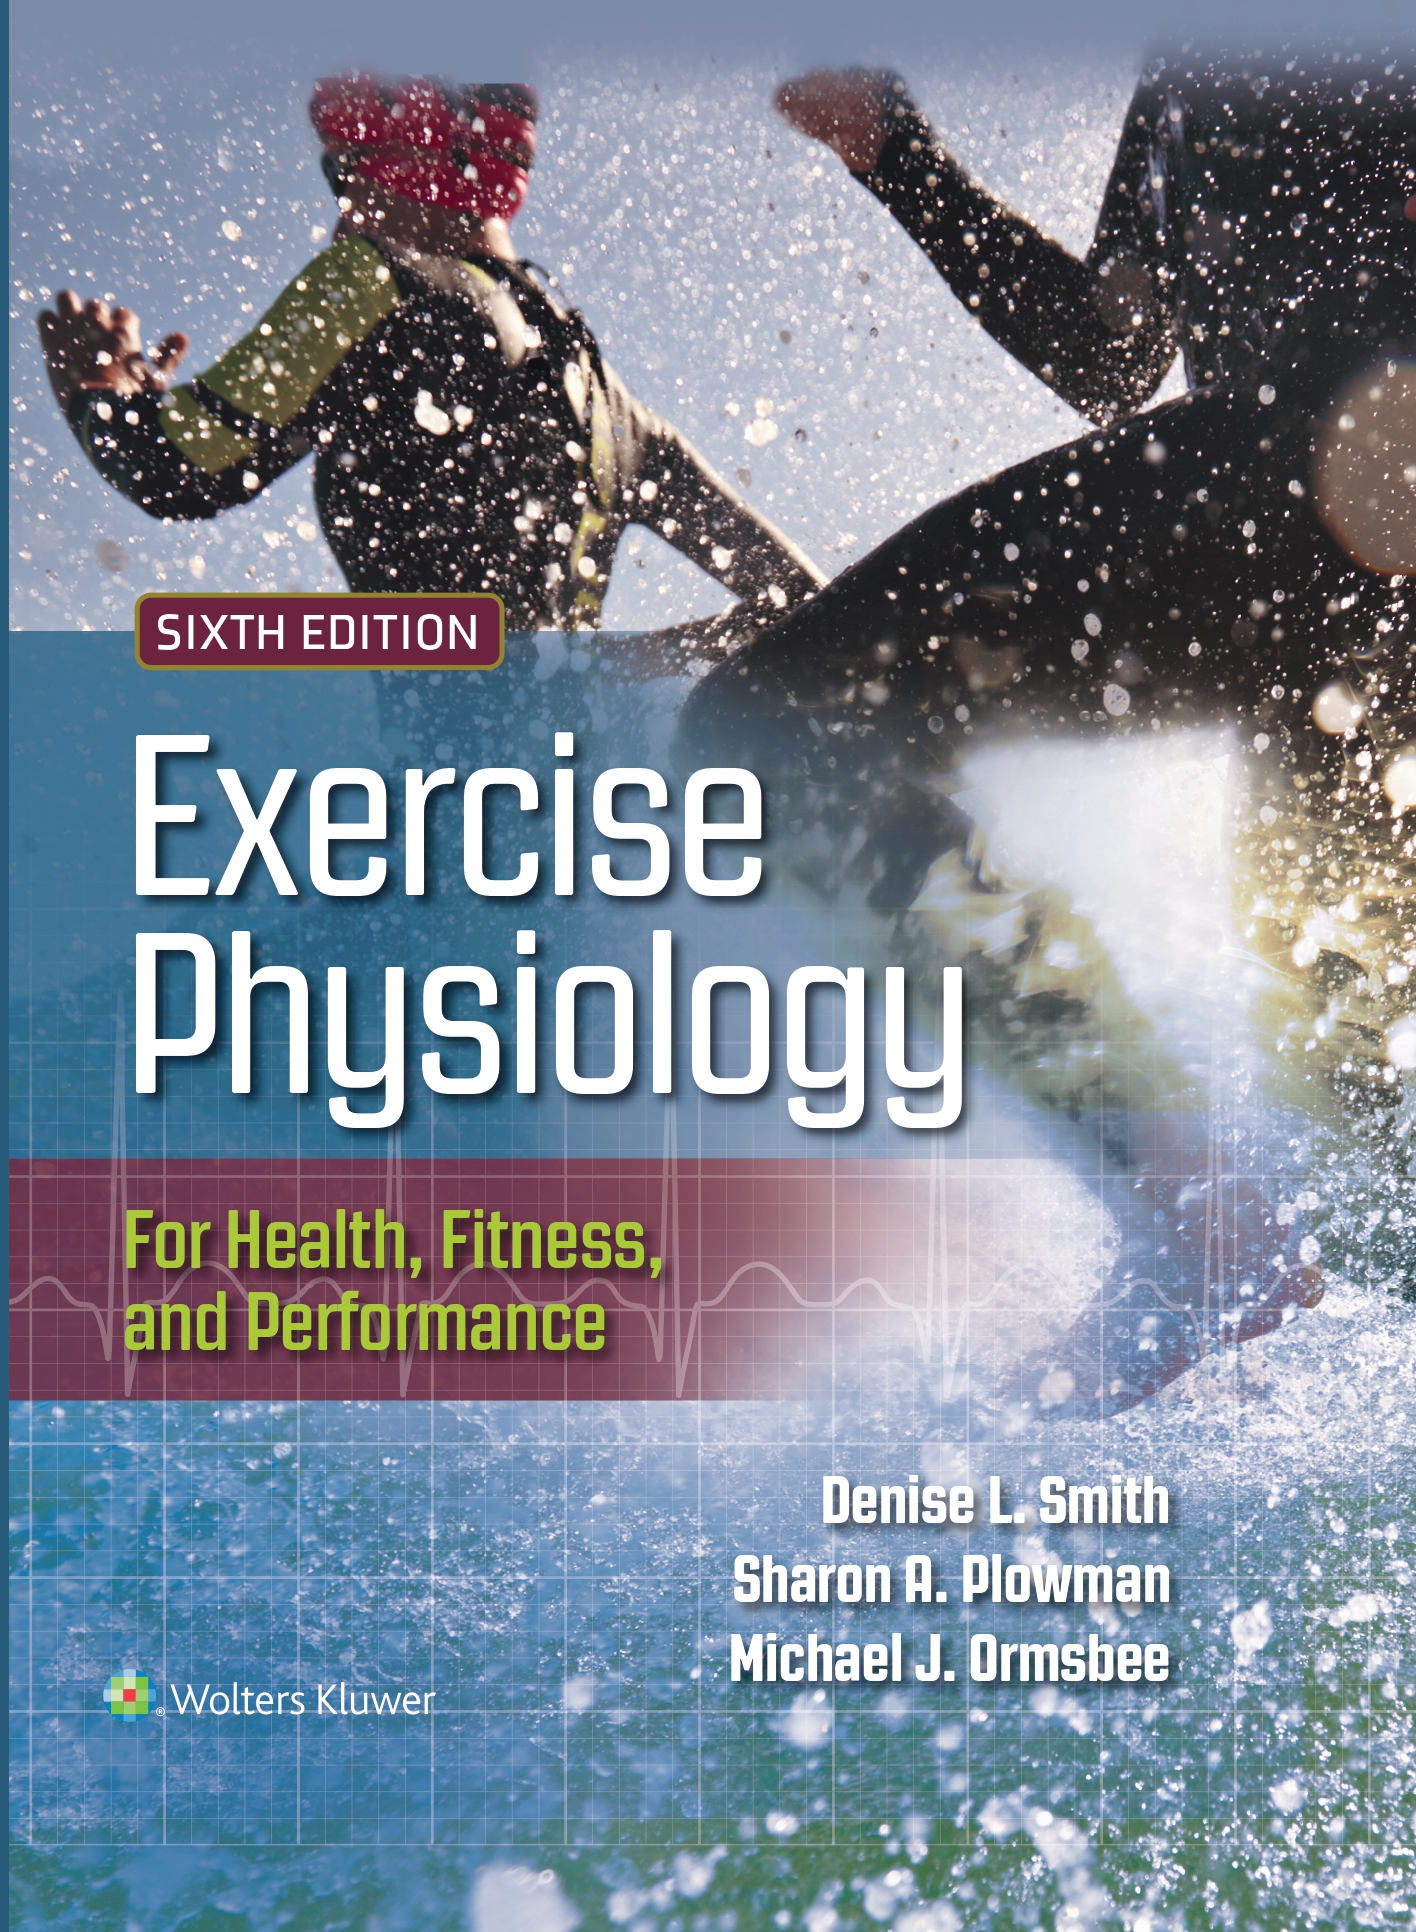 Exercise Physiology: For Health, Fitness, and Performance, 6th Edition